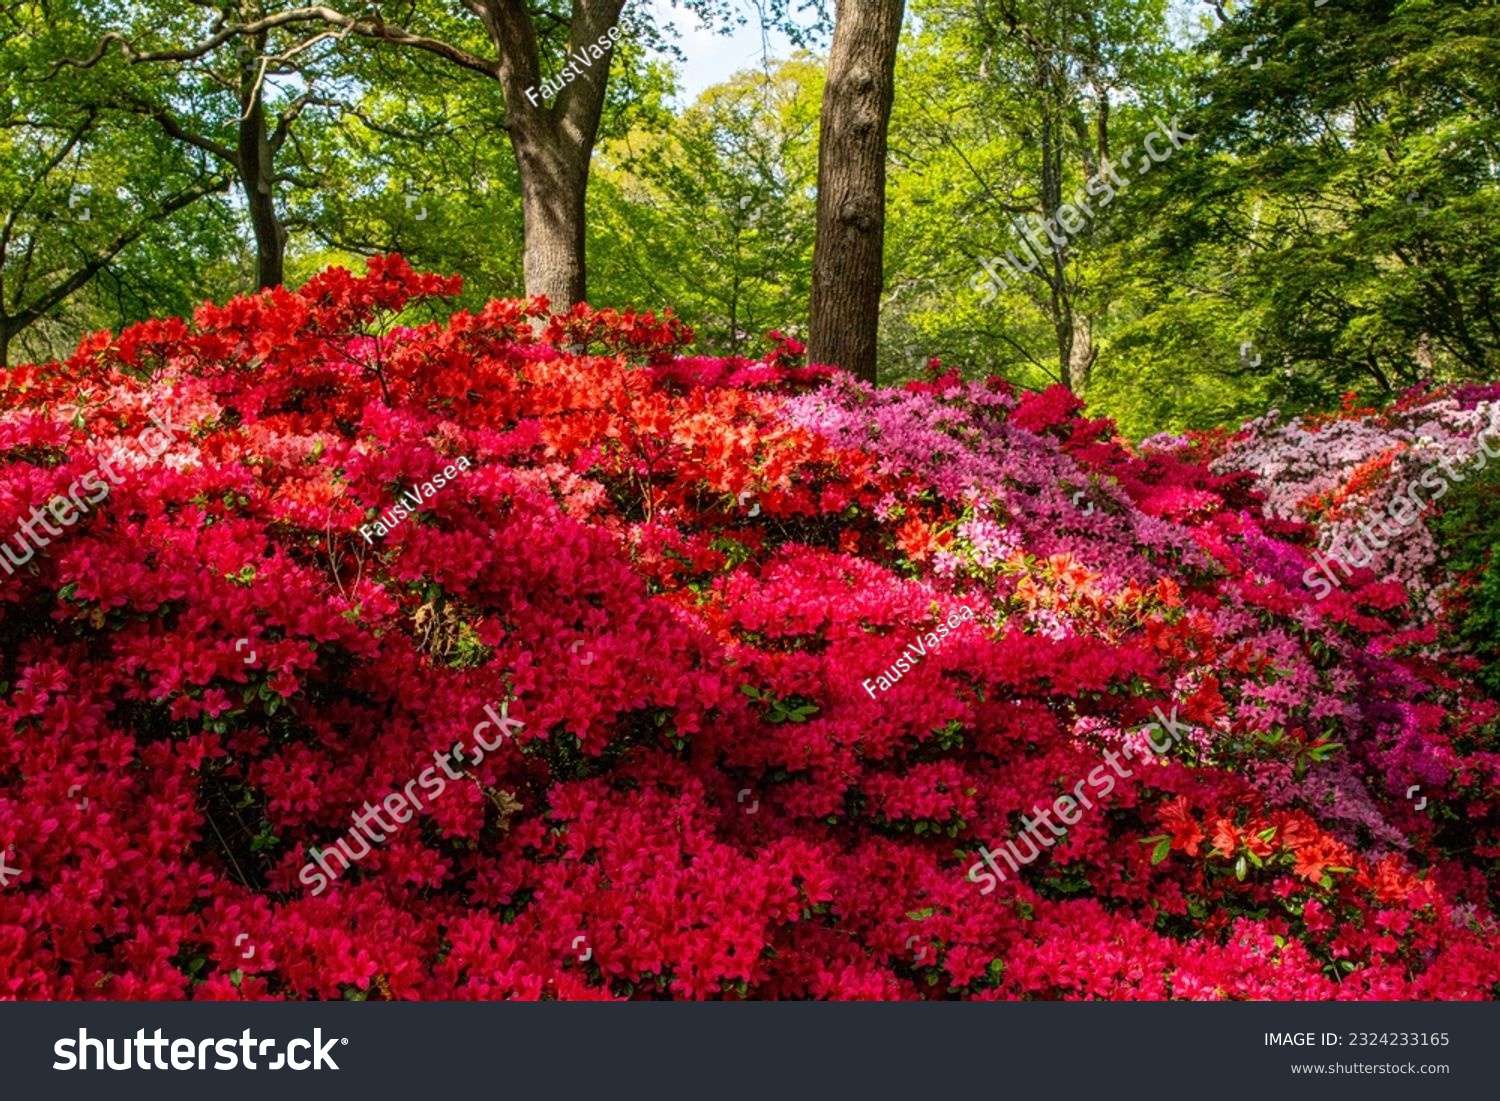 Beautiful close up photo of flowers in park #2324233165